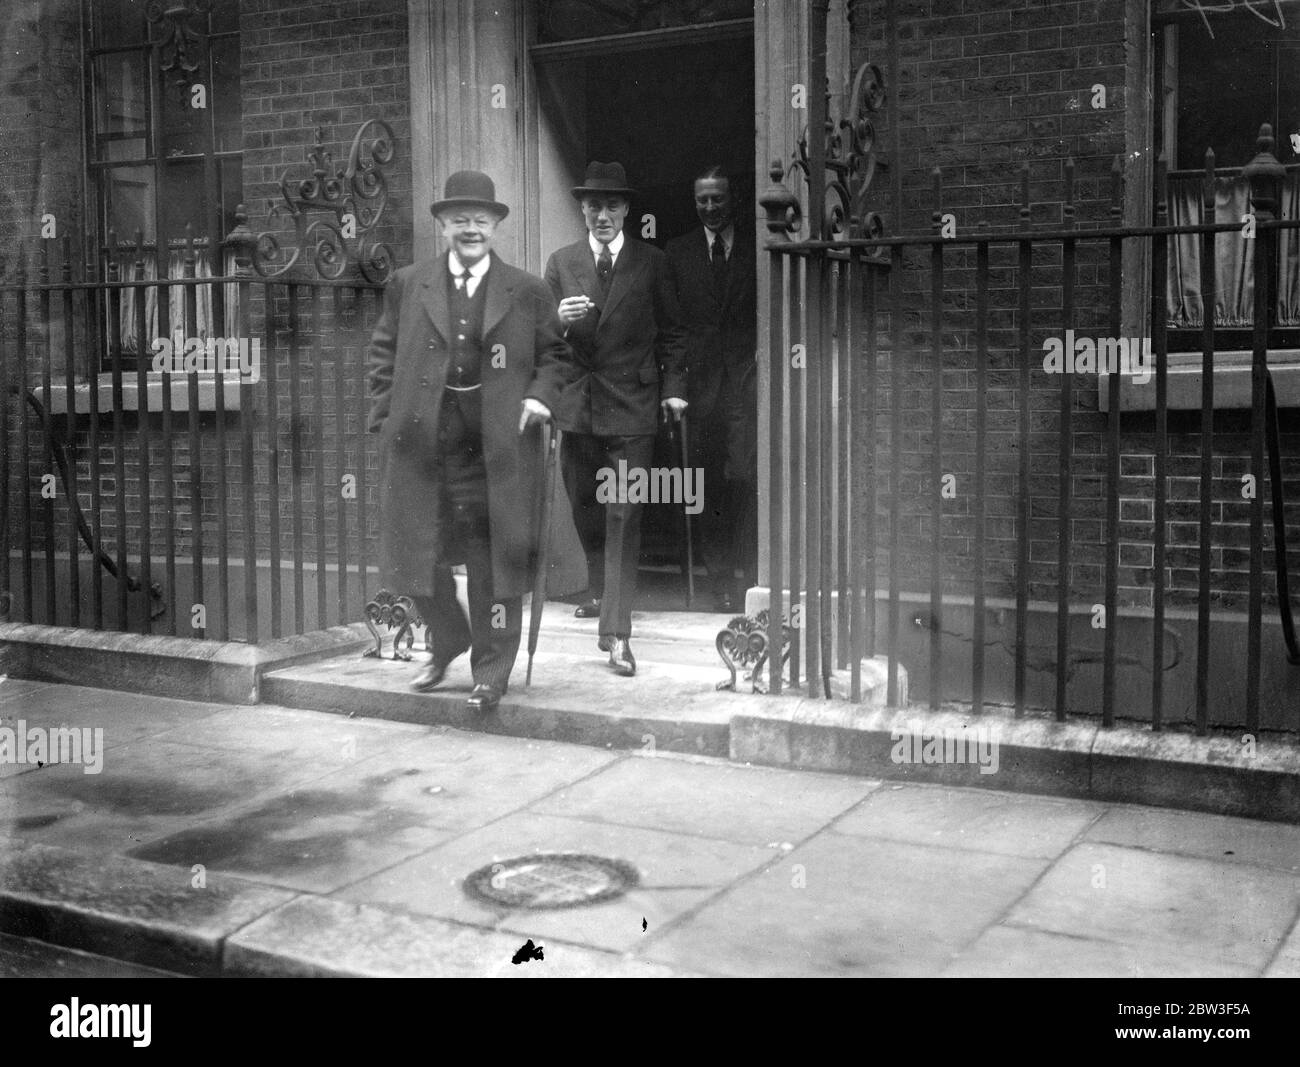 Ministers leave after Cabinet meeting . A Cabinet meeting was held at Downing Street when the situation brought about by Germany ' s reoccupation of the Rhineland was considered . Photo shows , Lord Hailsham , the Lord Chancellor ( left ) and Lord Swintop , the Air Minister , leaving after the meeting . 9 March 1936 Stock Photo